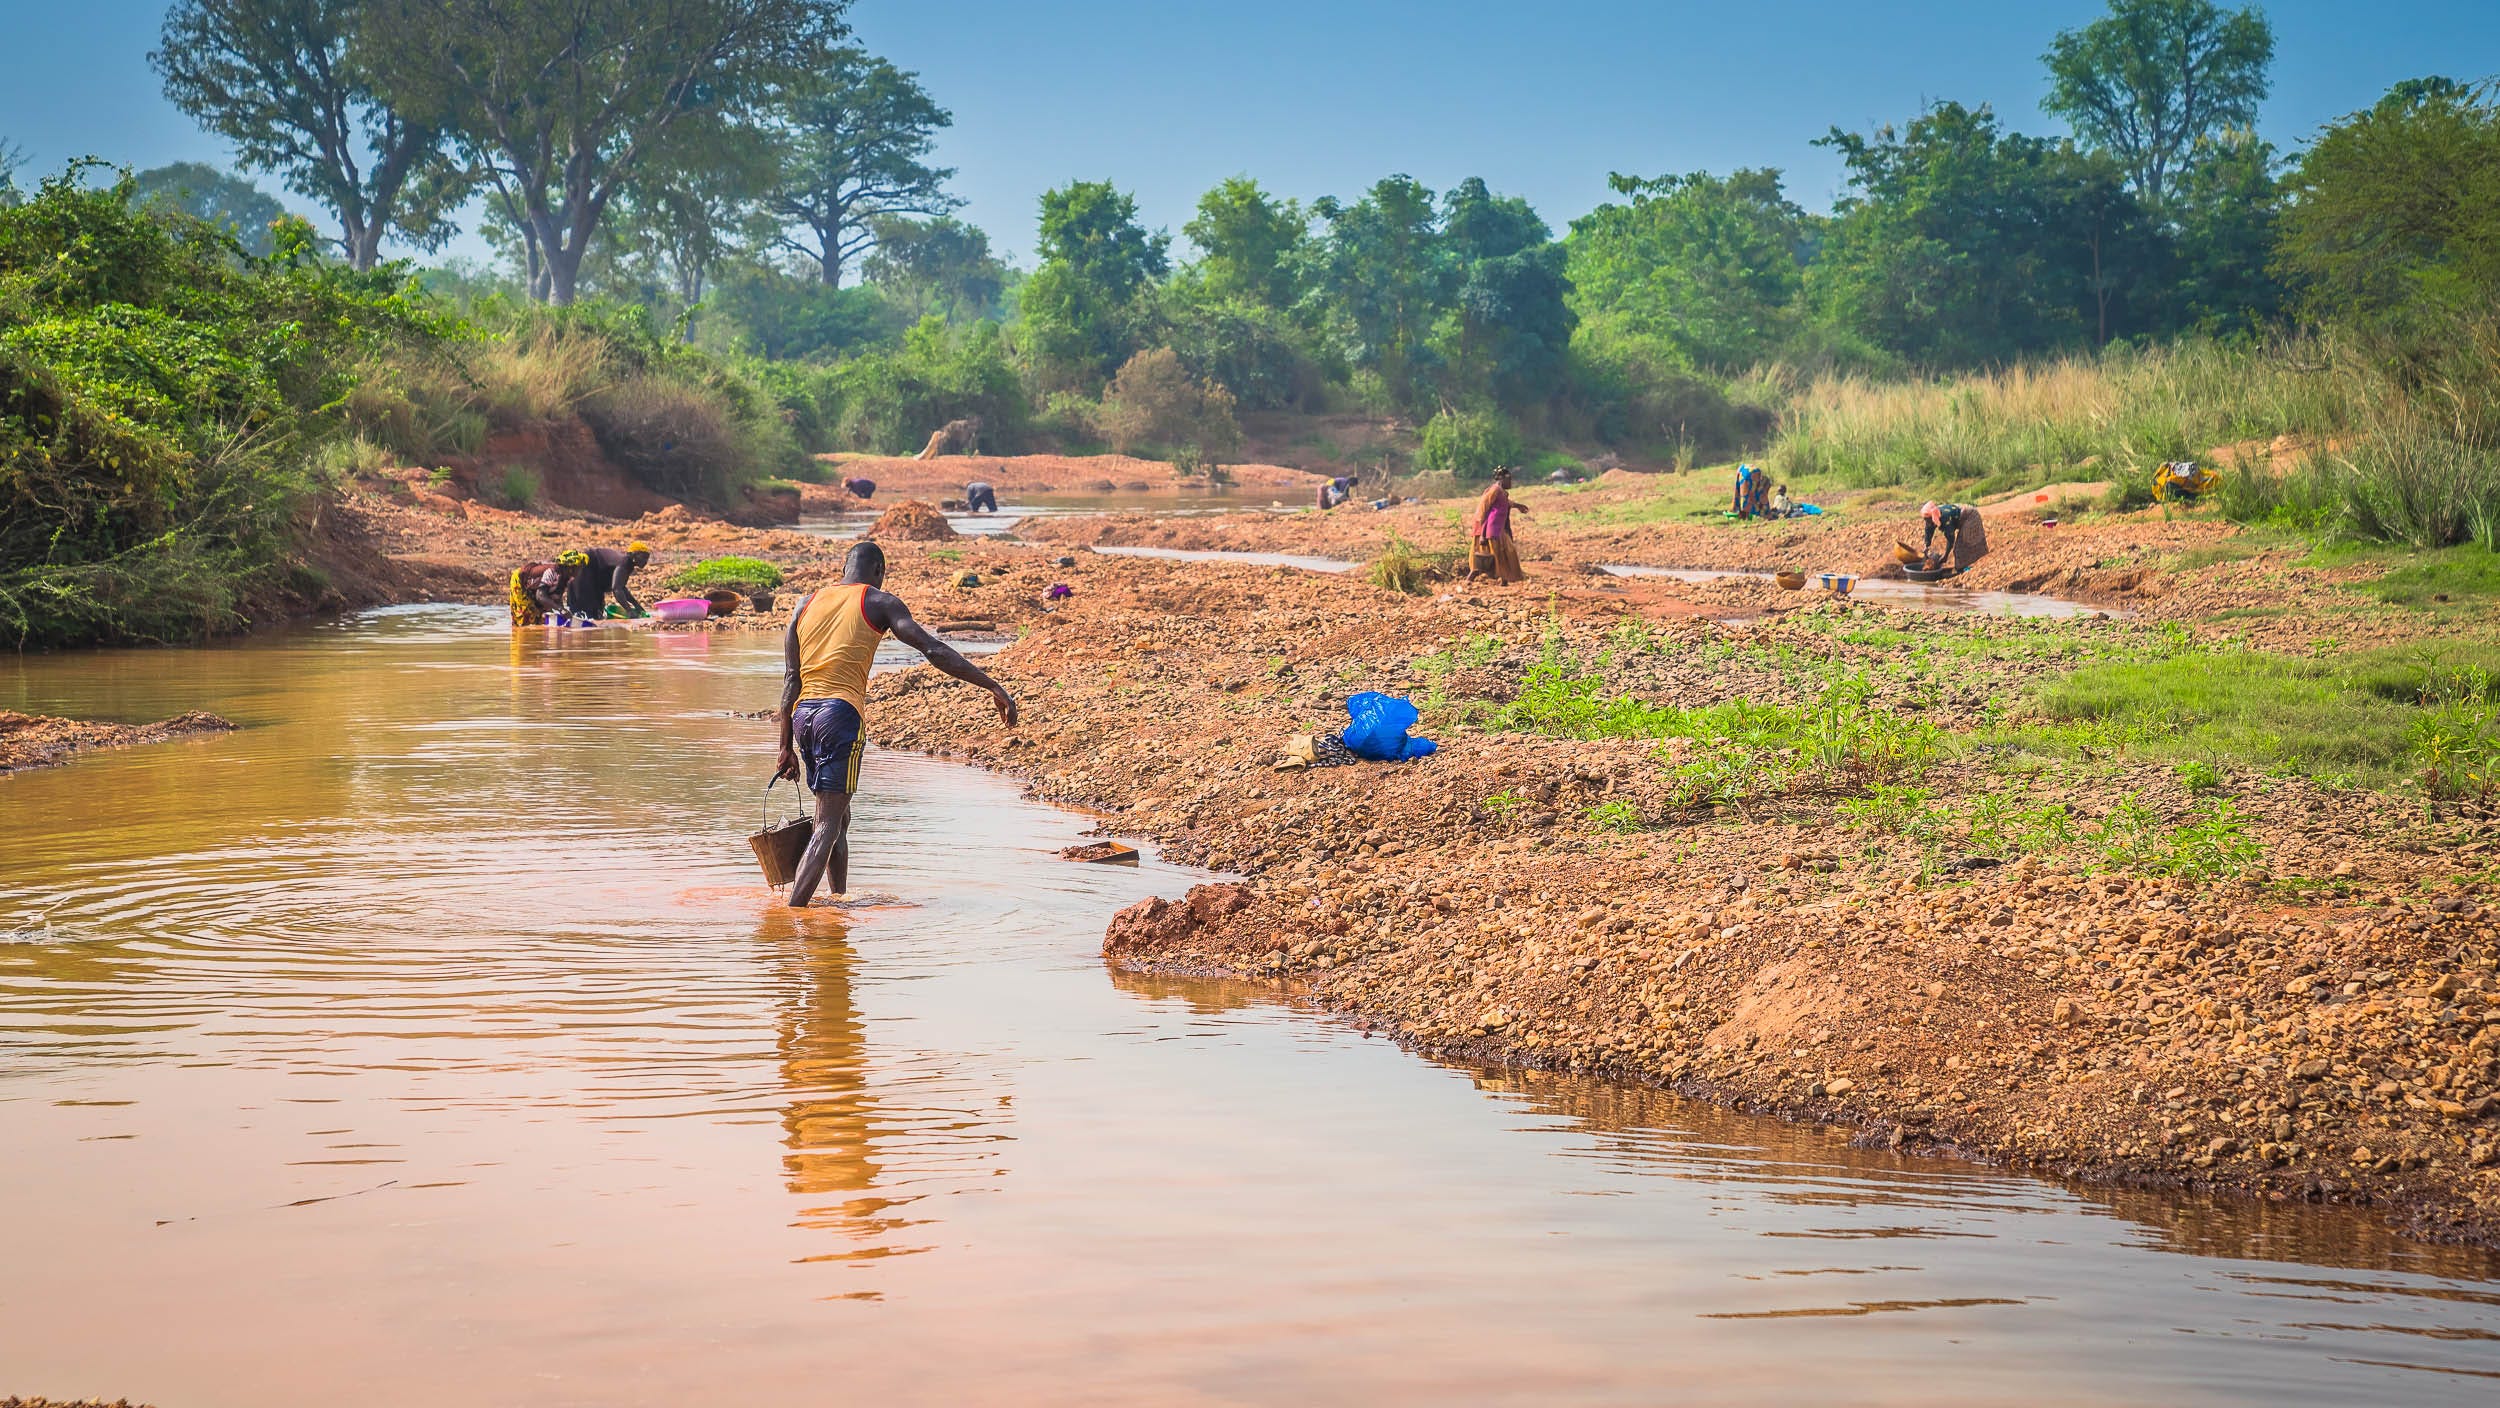 Illegal mining has muddied tropical rivers worldwide, Science